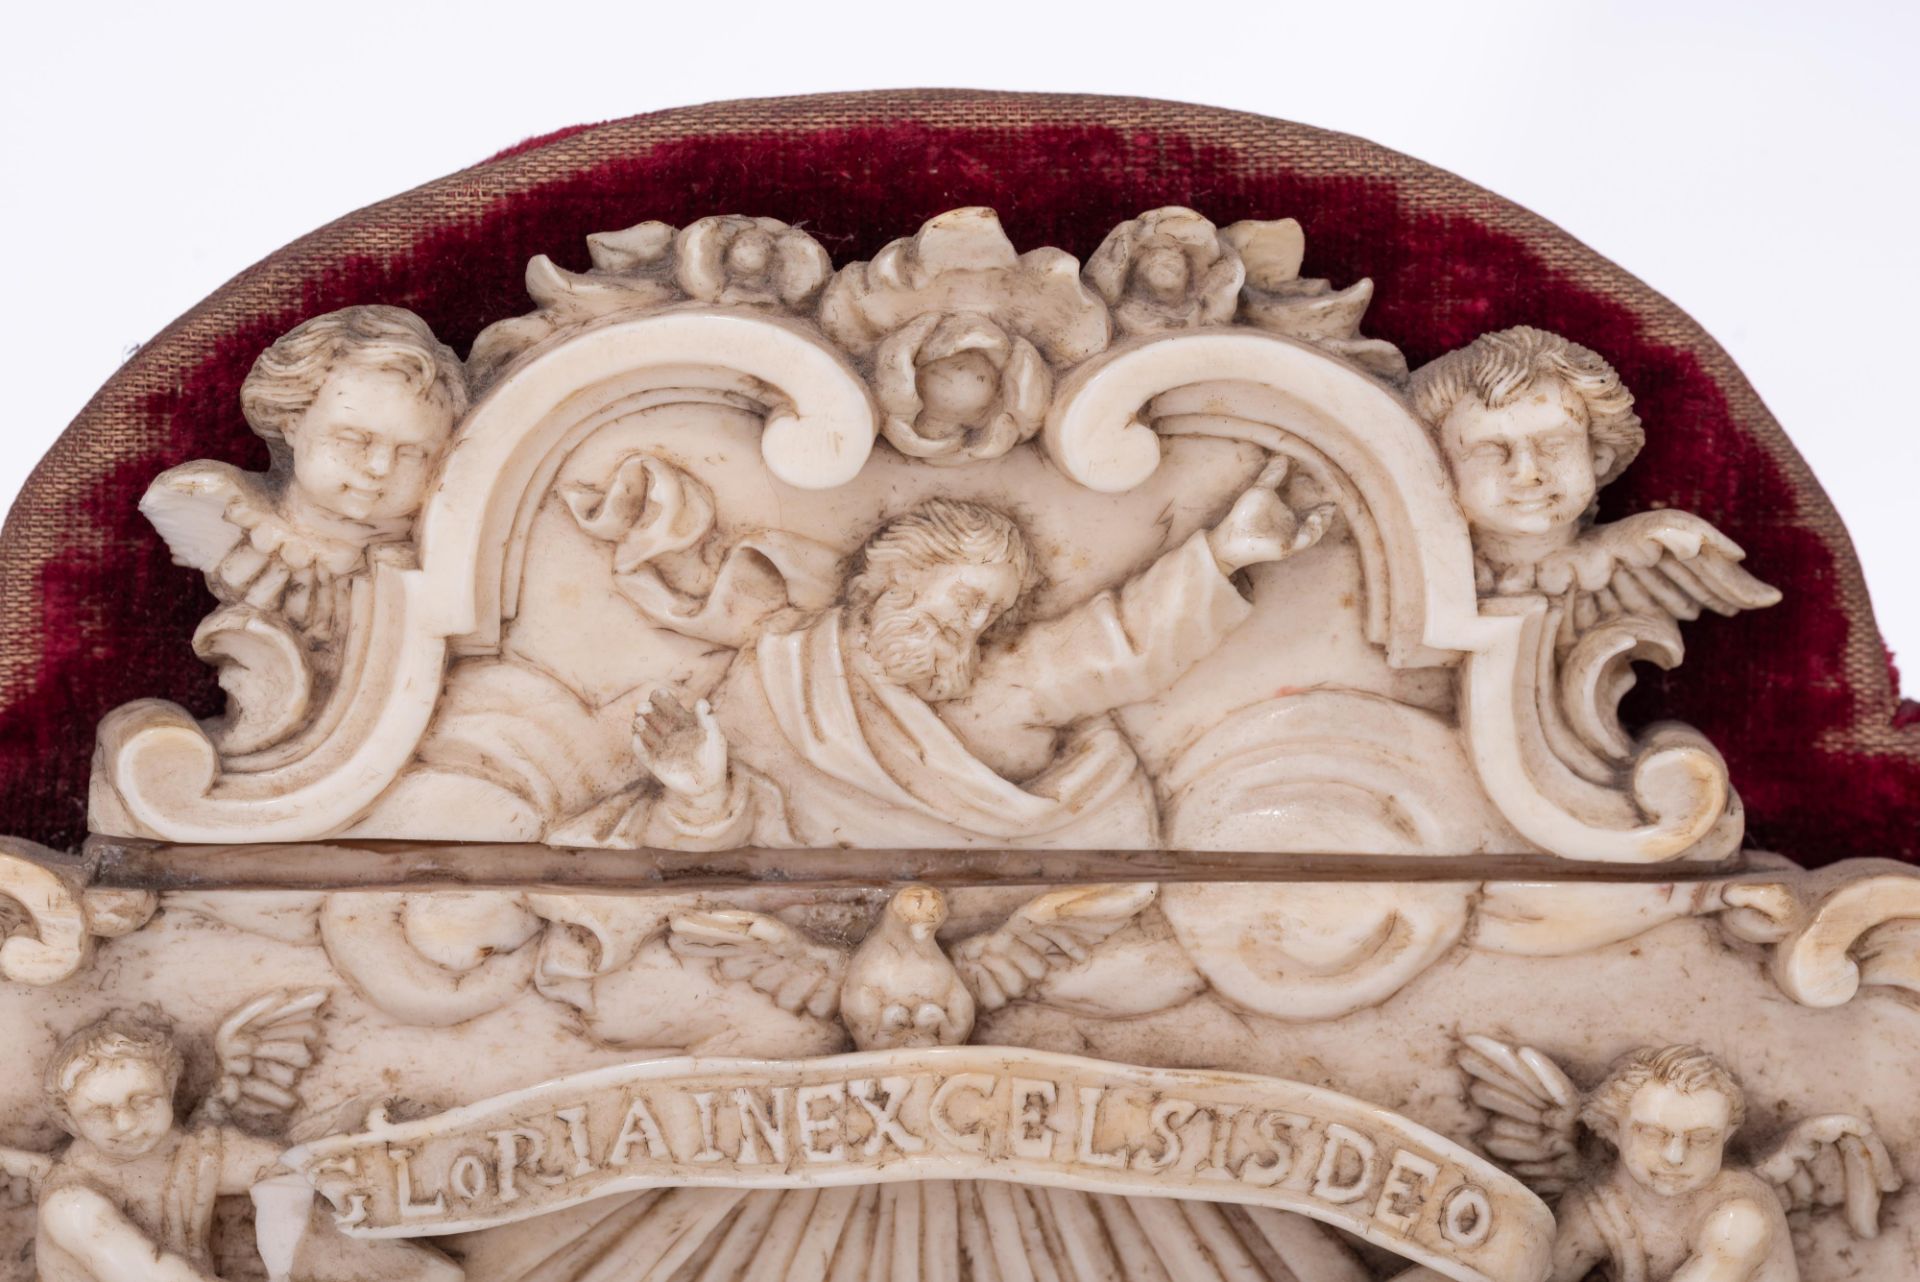 A 17th/18thC ivory group depicting the Nativity of Christ, H 11,5 cm - W 16 cm - Image 3 of 12